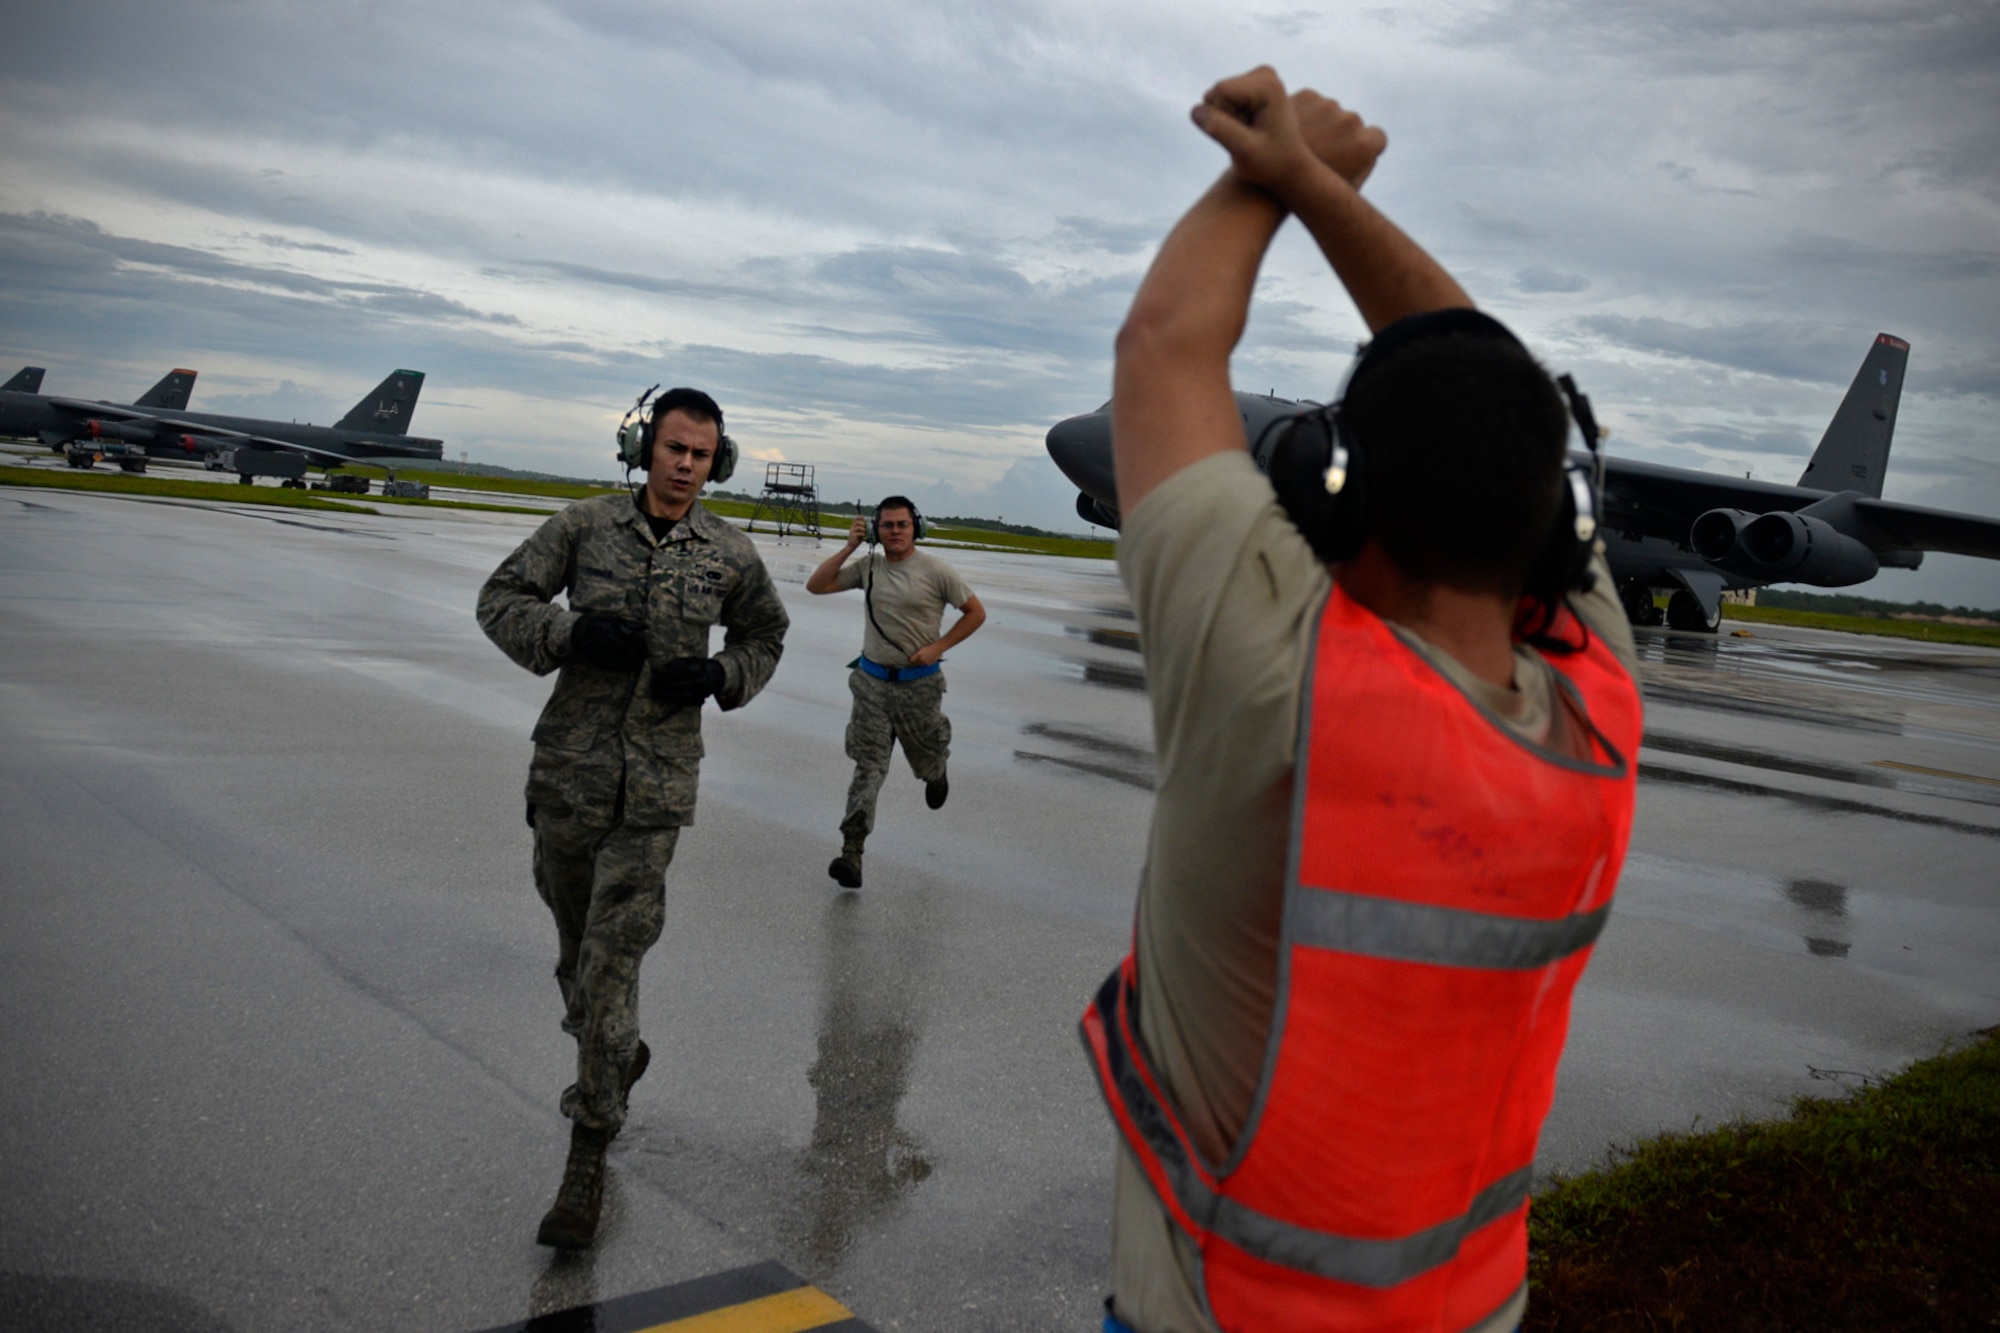 Senior Airman Taylor Giordano, right, signals to the pilot on a B-52 Stratofortress, as his wingmen Senior Airman Logan Turner, left, and Staff Sgt. Stephen Cole get into position to launch their aircraft Aug. 22, 2015, at Andersen Air Force Base, Guam. The Airmen are B-52 crew chiefs assigned to the 20th Expeditionary Aircraft Maintenance Squadron. Bomber crews with the 20th Expeditionary Bomb Squadron are part of U.S. Pacific Command’s continuous bomber presence and support ongoing  operations in the Indo-Asia-Pacific region. (U.S. Air Force photo by Staff Sgt. Alexander W. Riedel/Released)